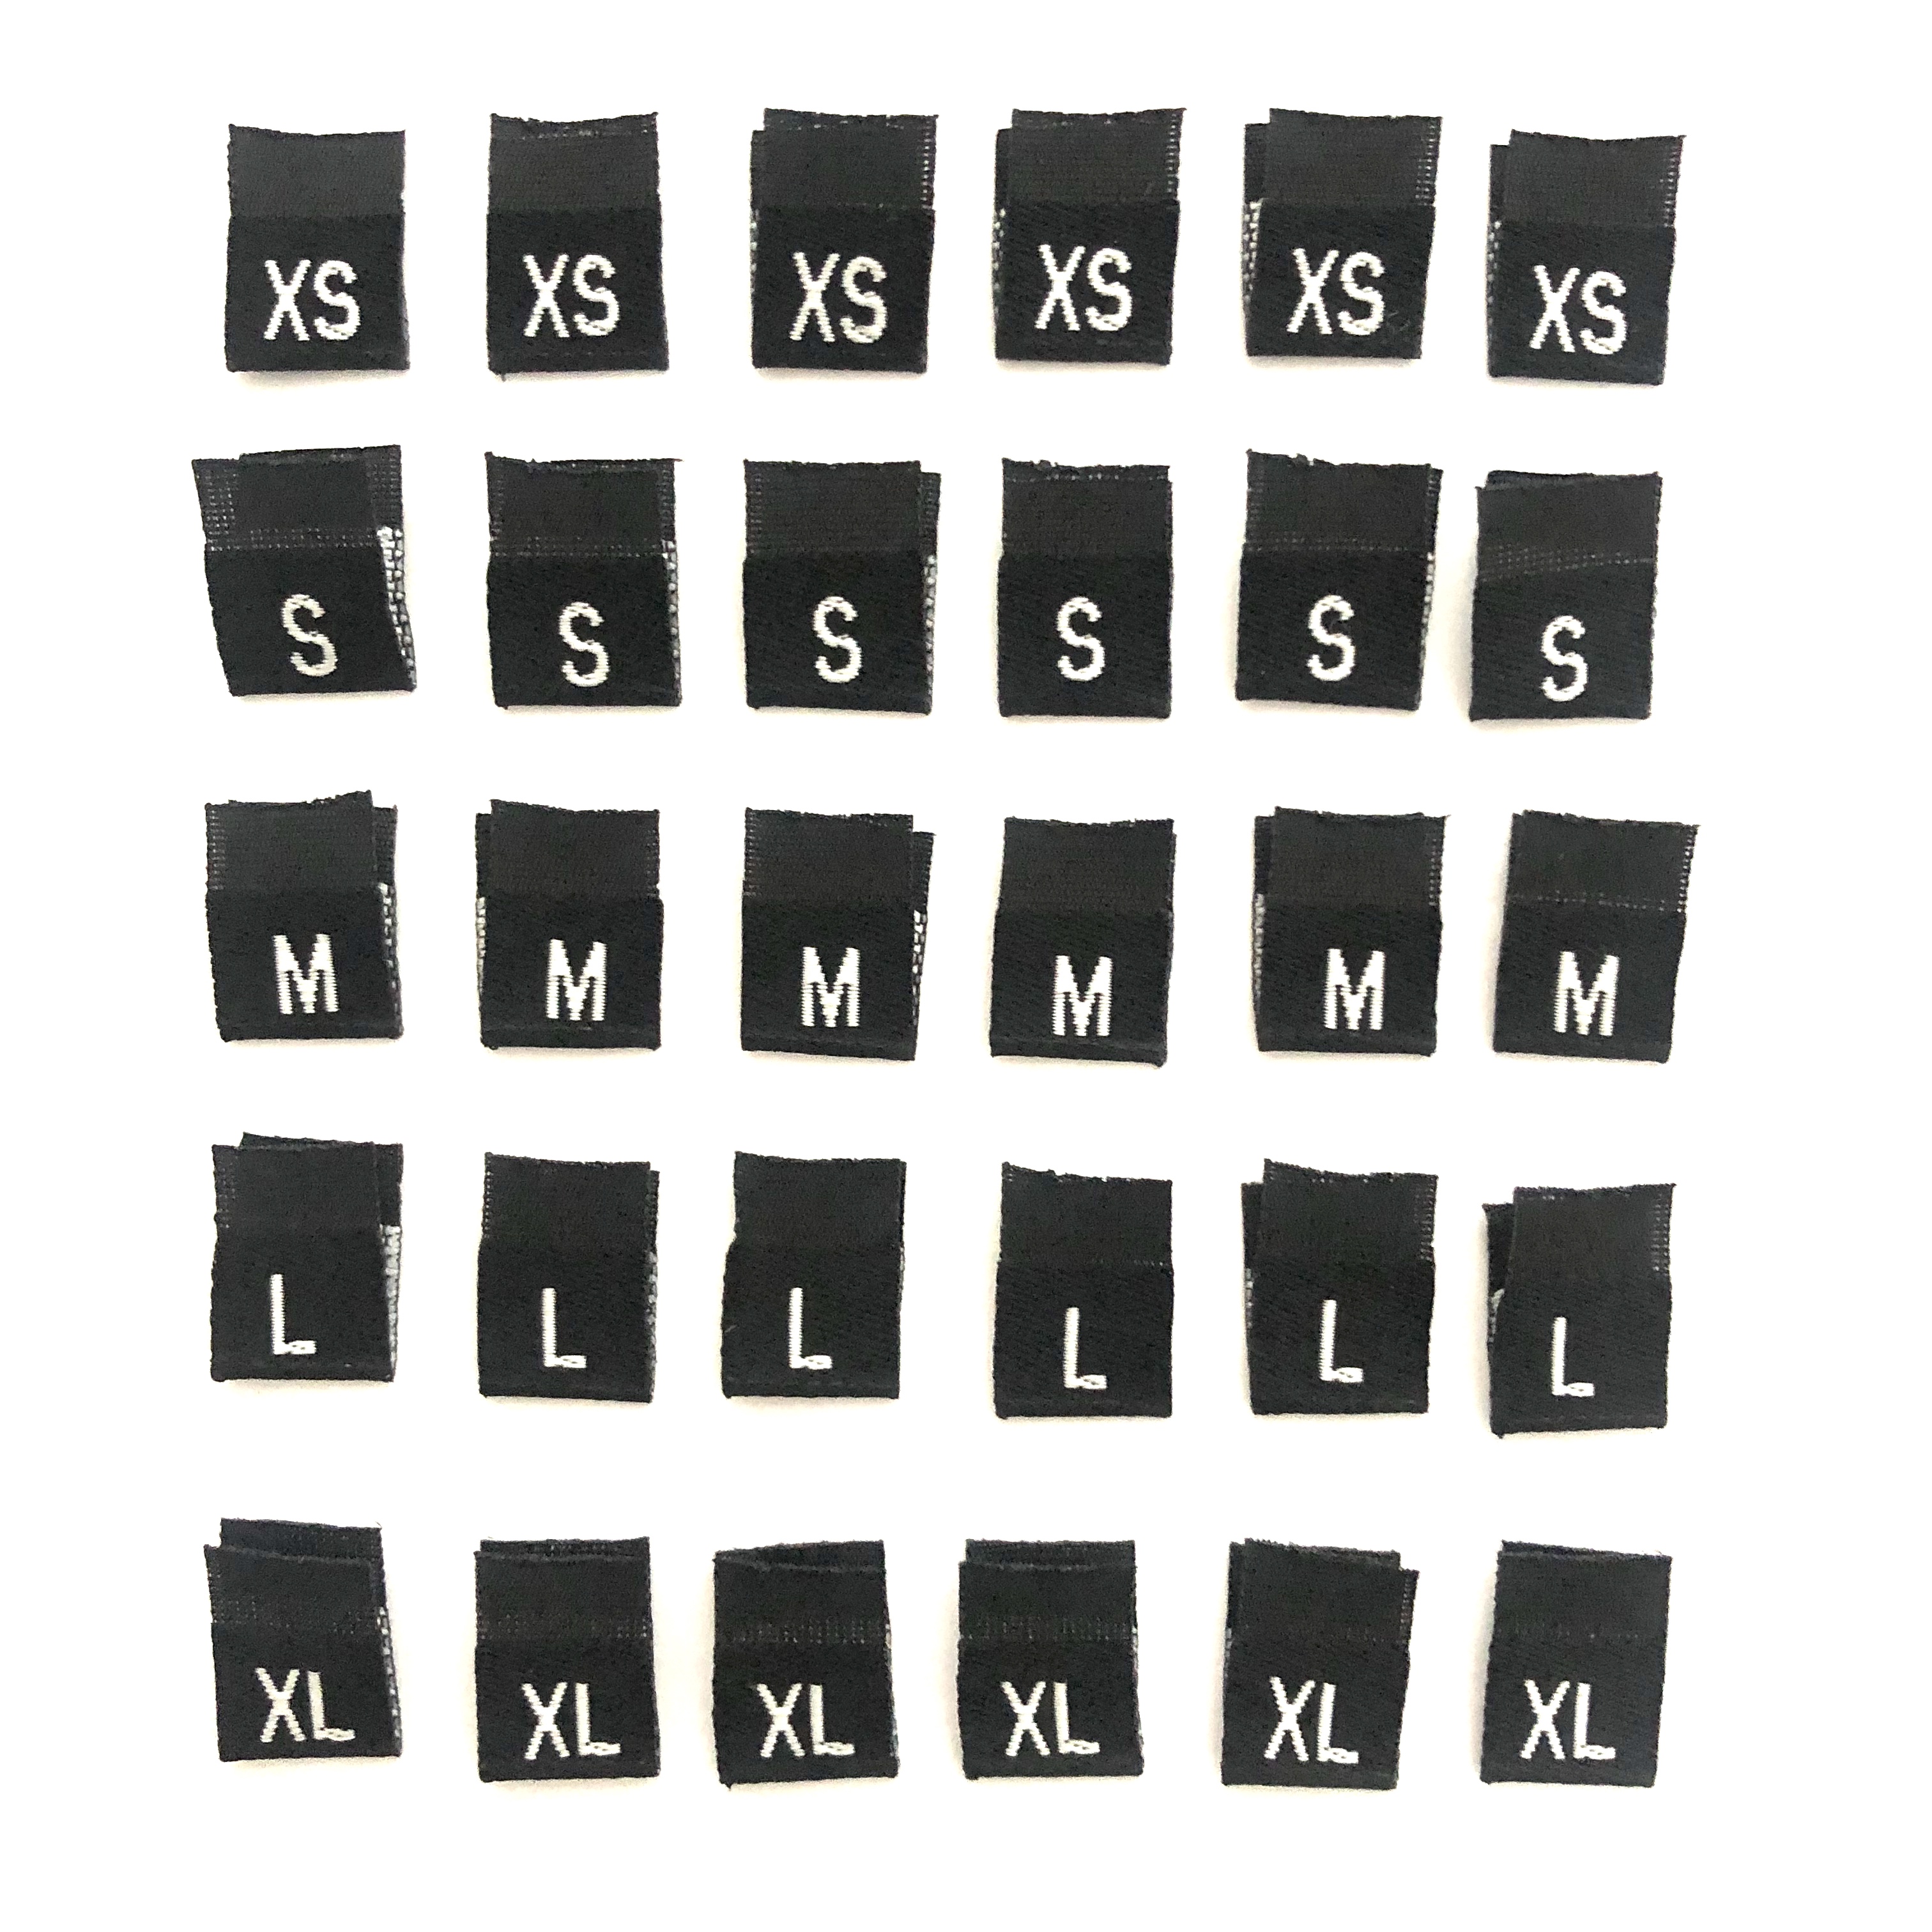 XS S M L XL clothing labels for clothes tags size woven labels for garment size